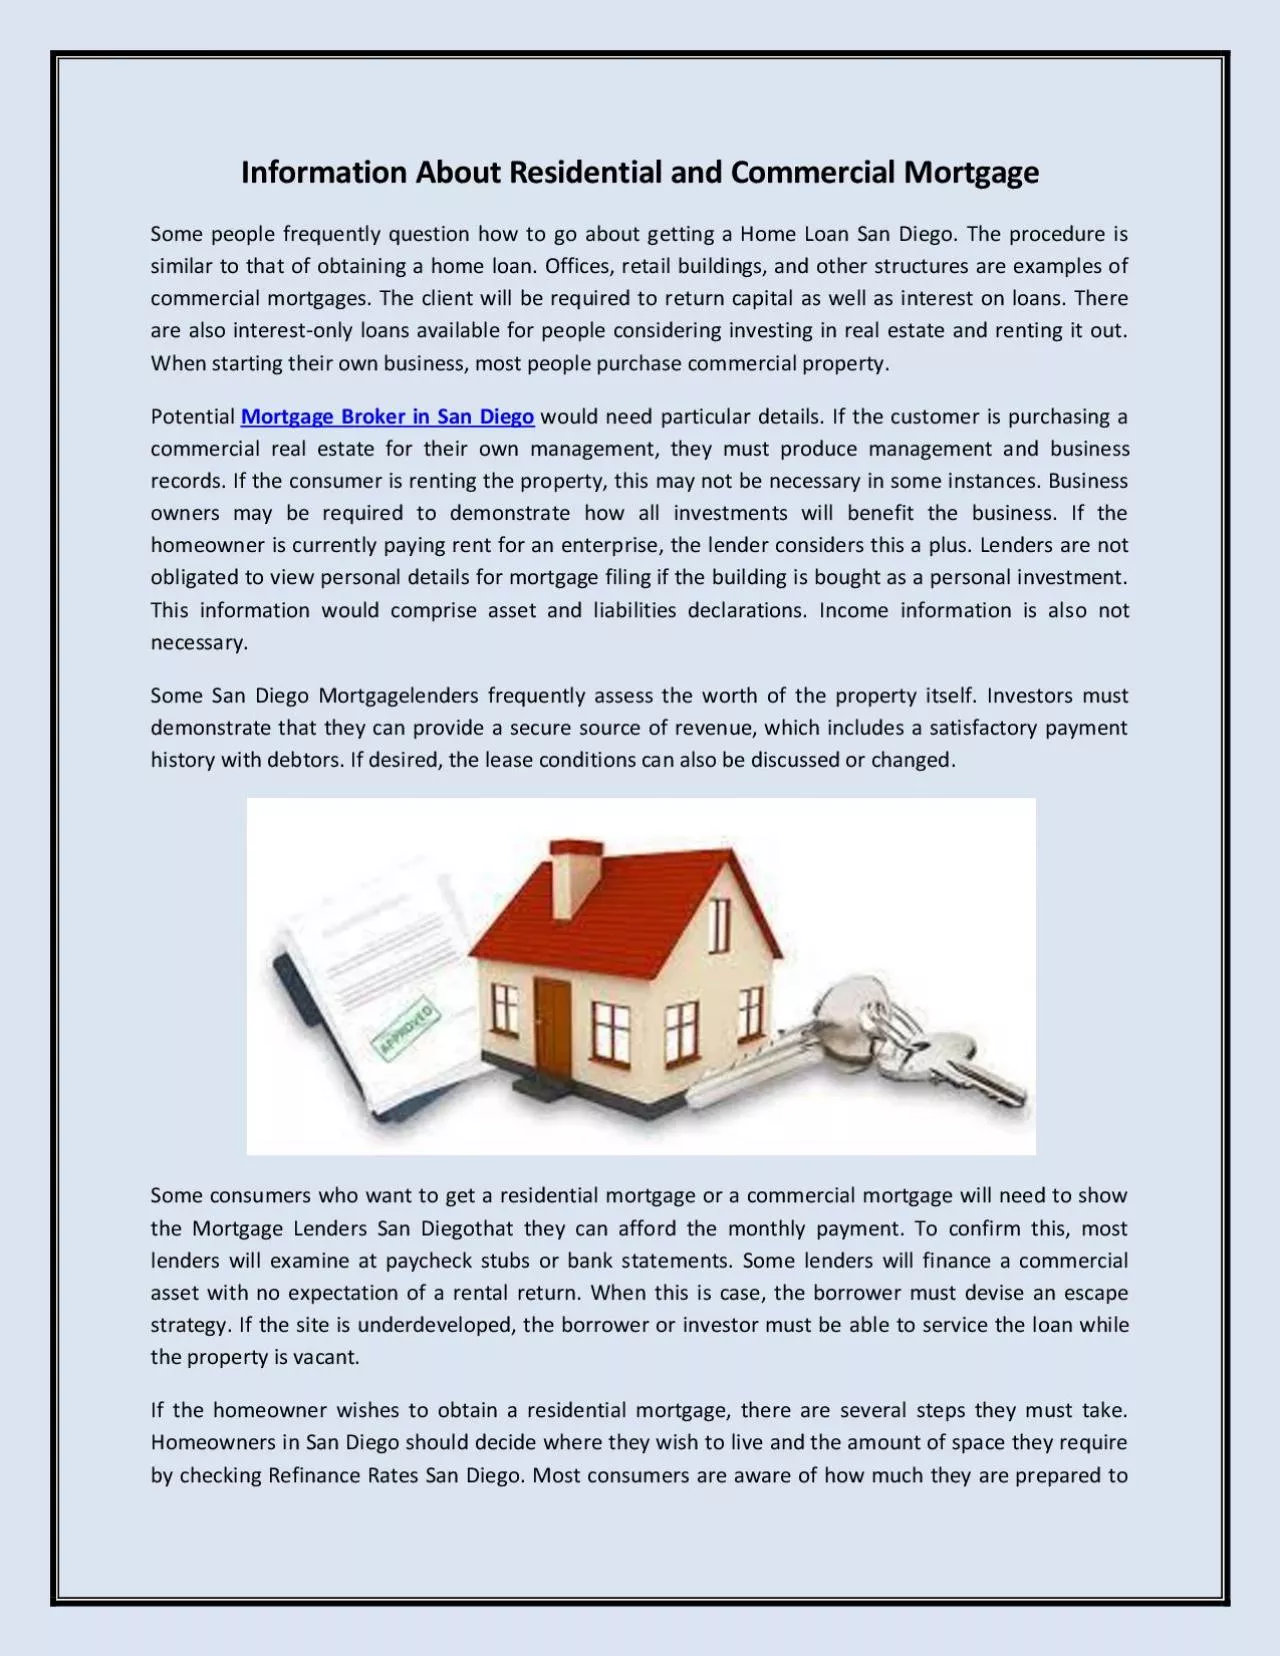 Information About Residential and Commercial Mortgage